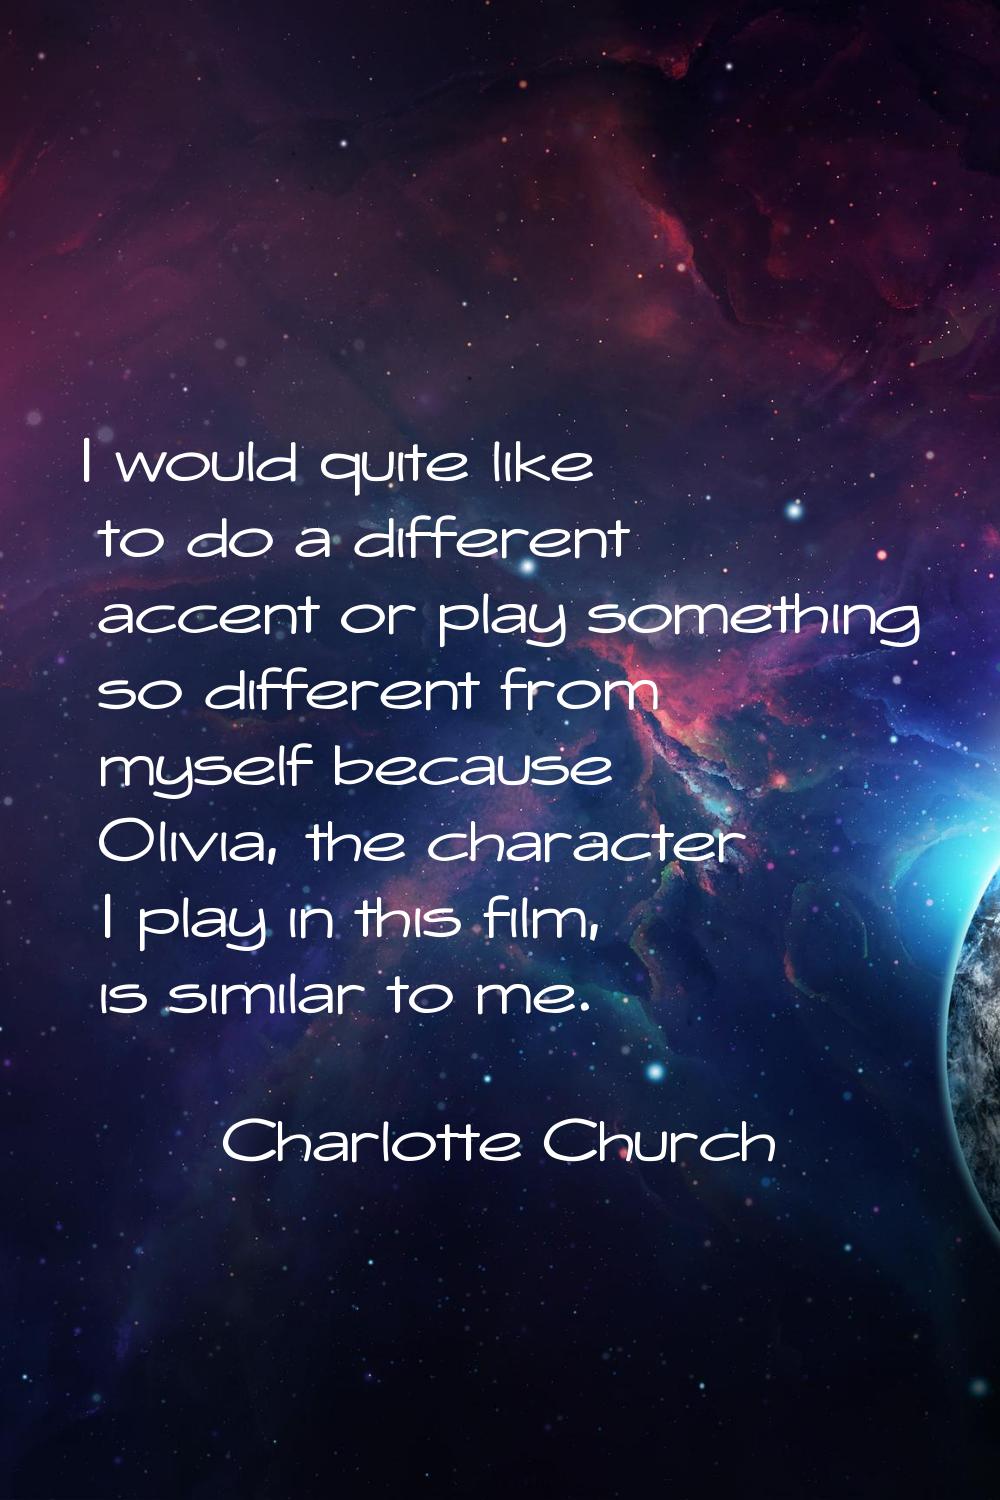 I would quite like to do a different accent or play something so different from myself because Oliv